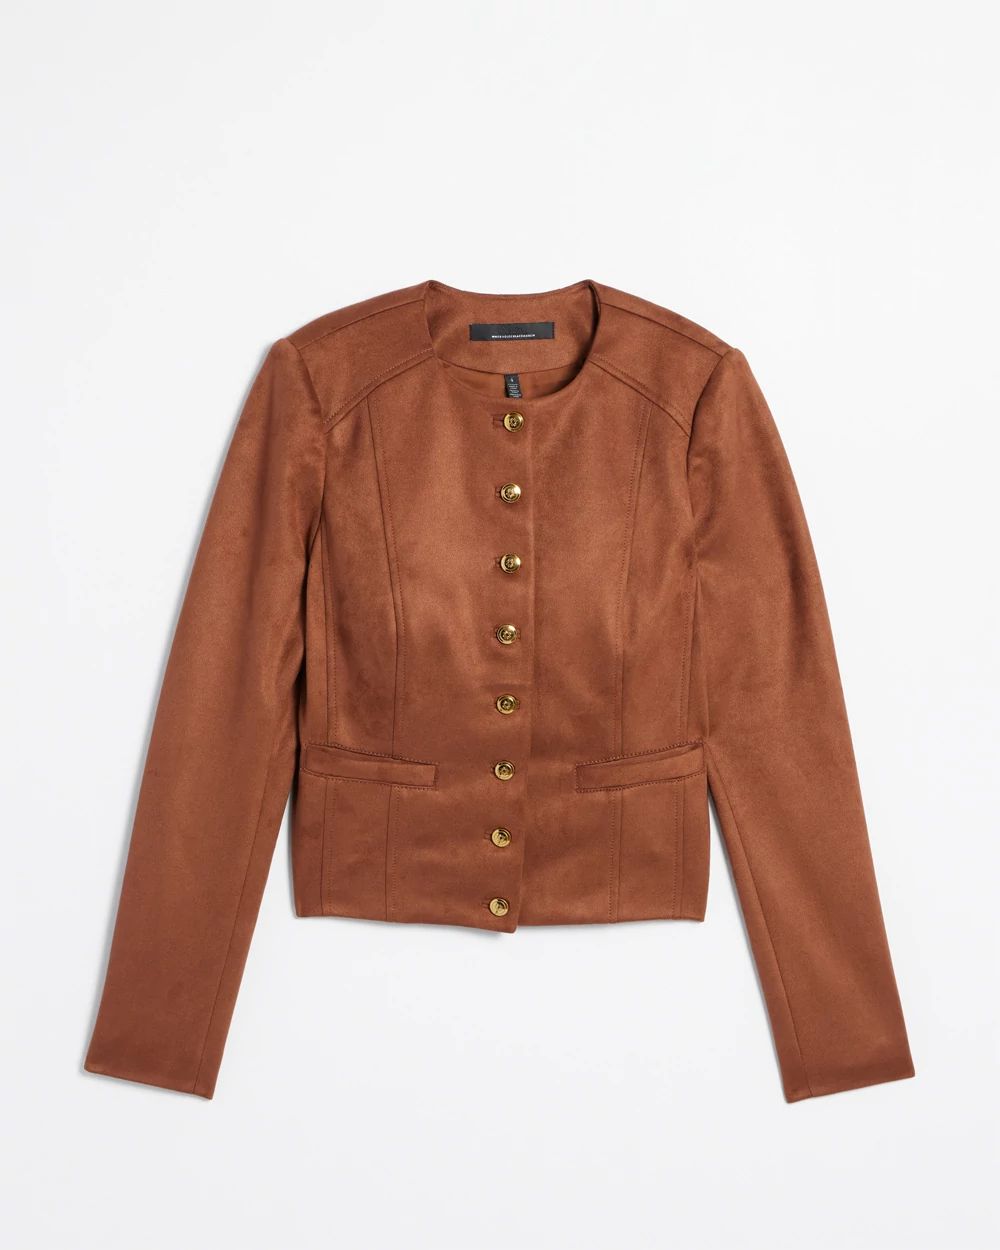 Petite Ultra Suede Military Jacket click to view larger image.